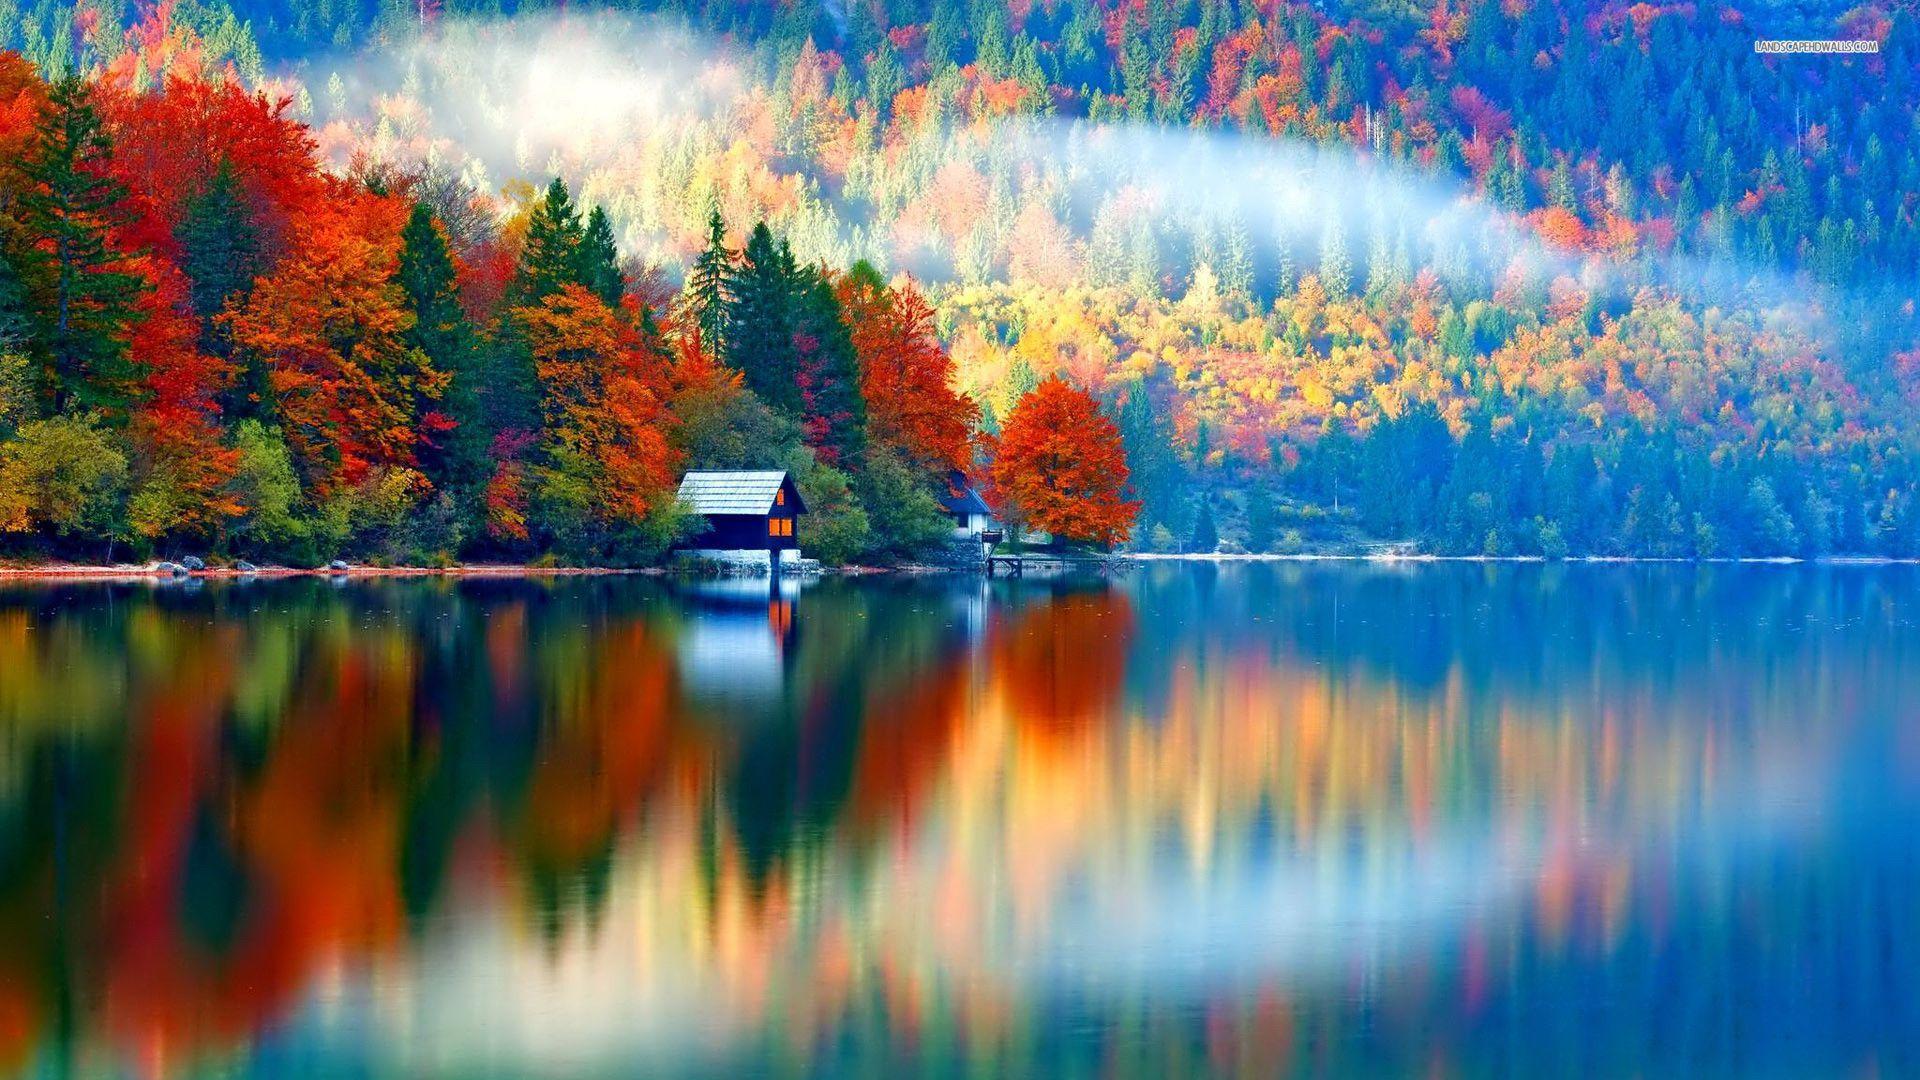 Amazing fall colors on the lake side wallpaper #